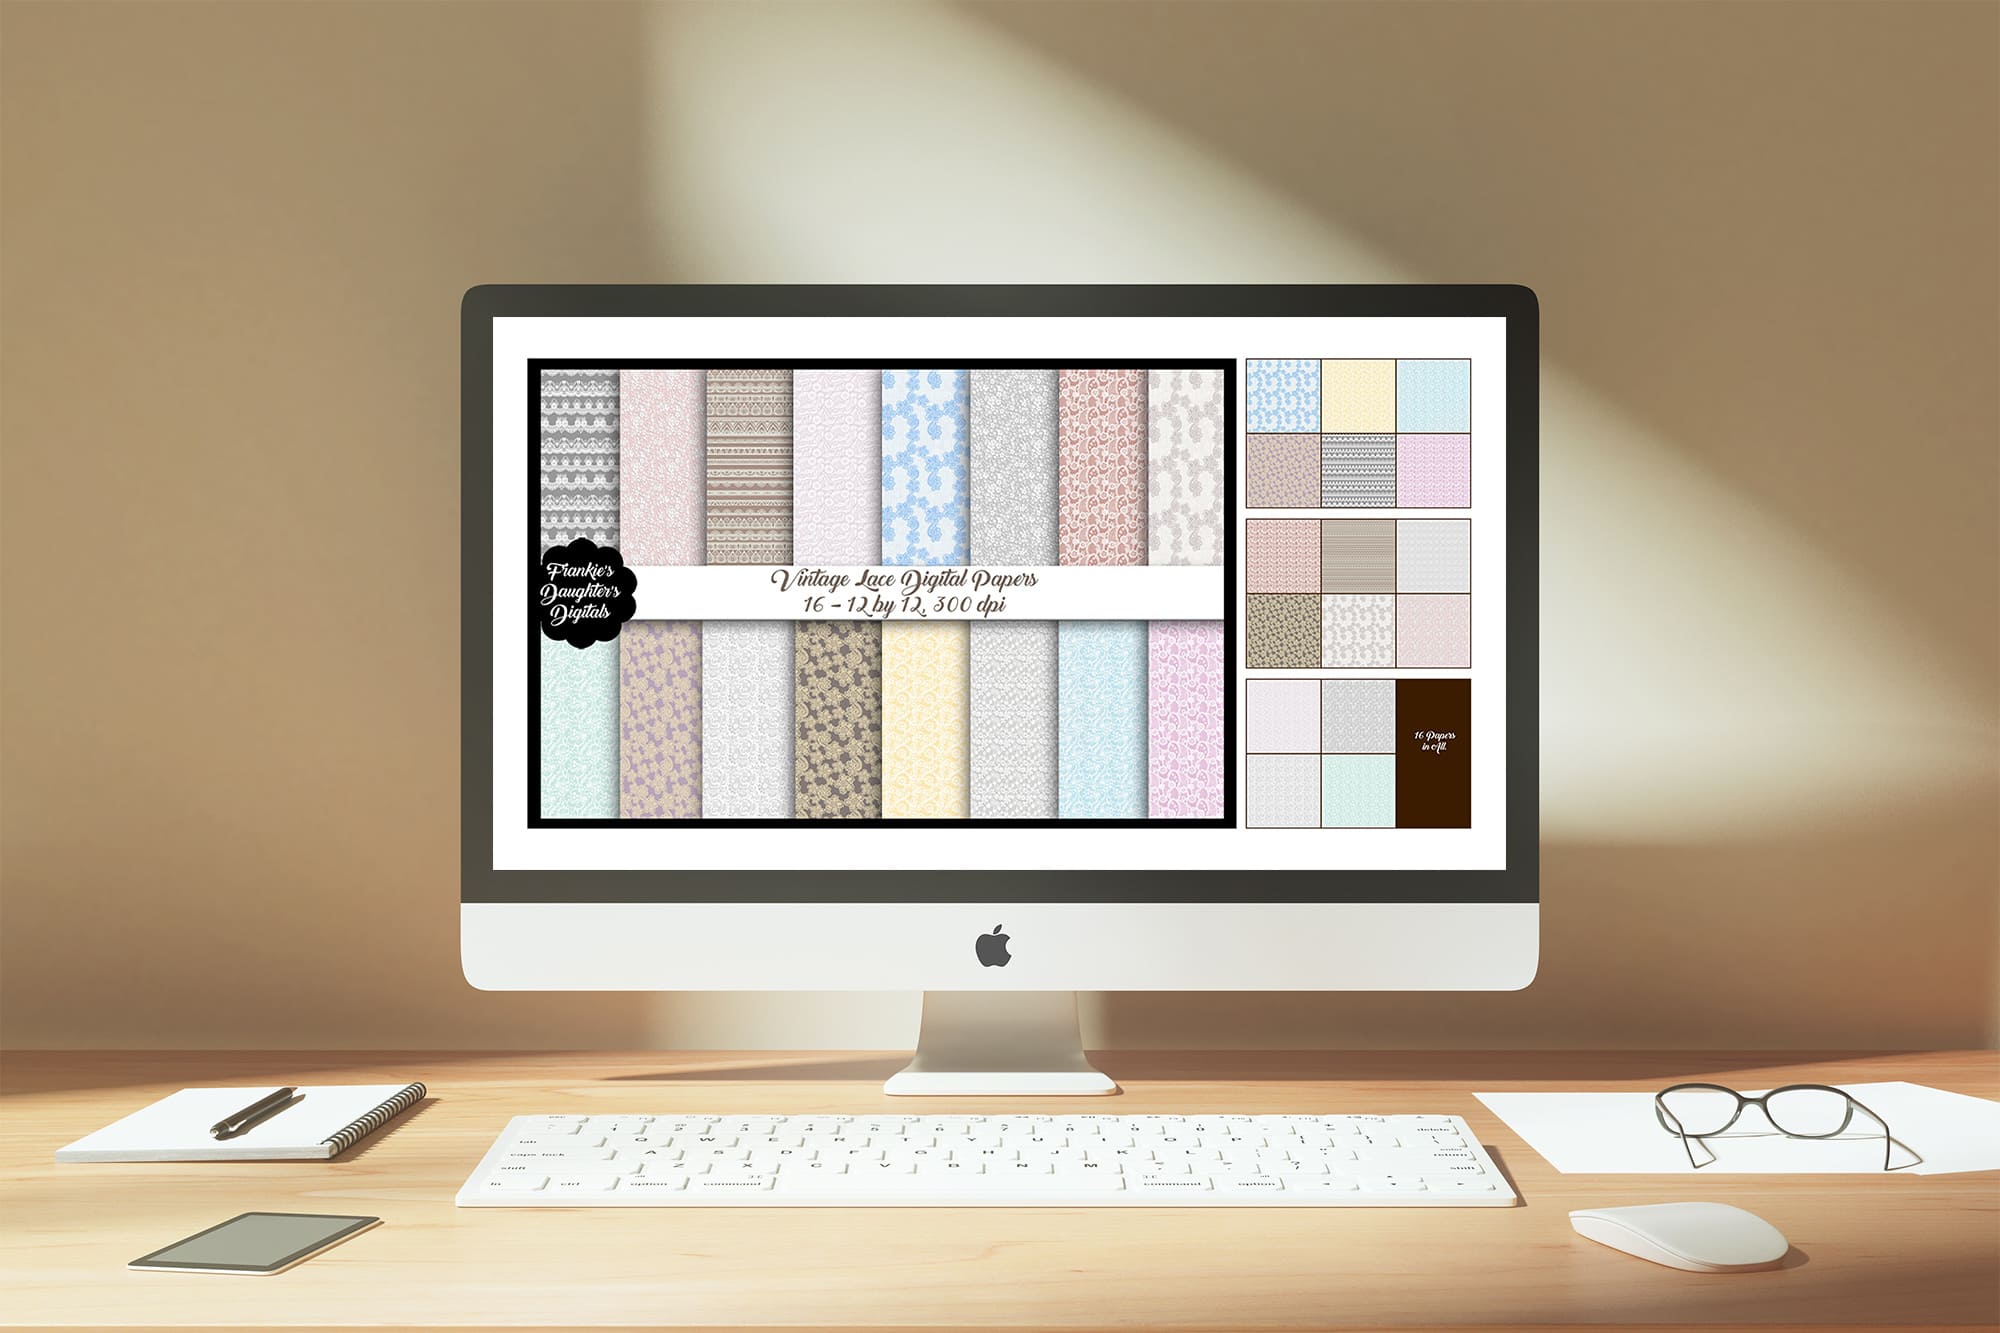 Vintage Lace Digital Papers, Shabby Chic Backgrounds on the IMac Mockup.